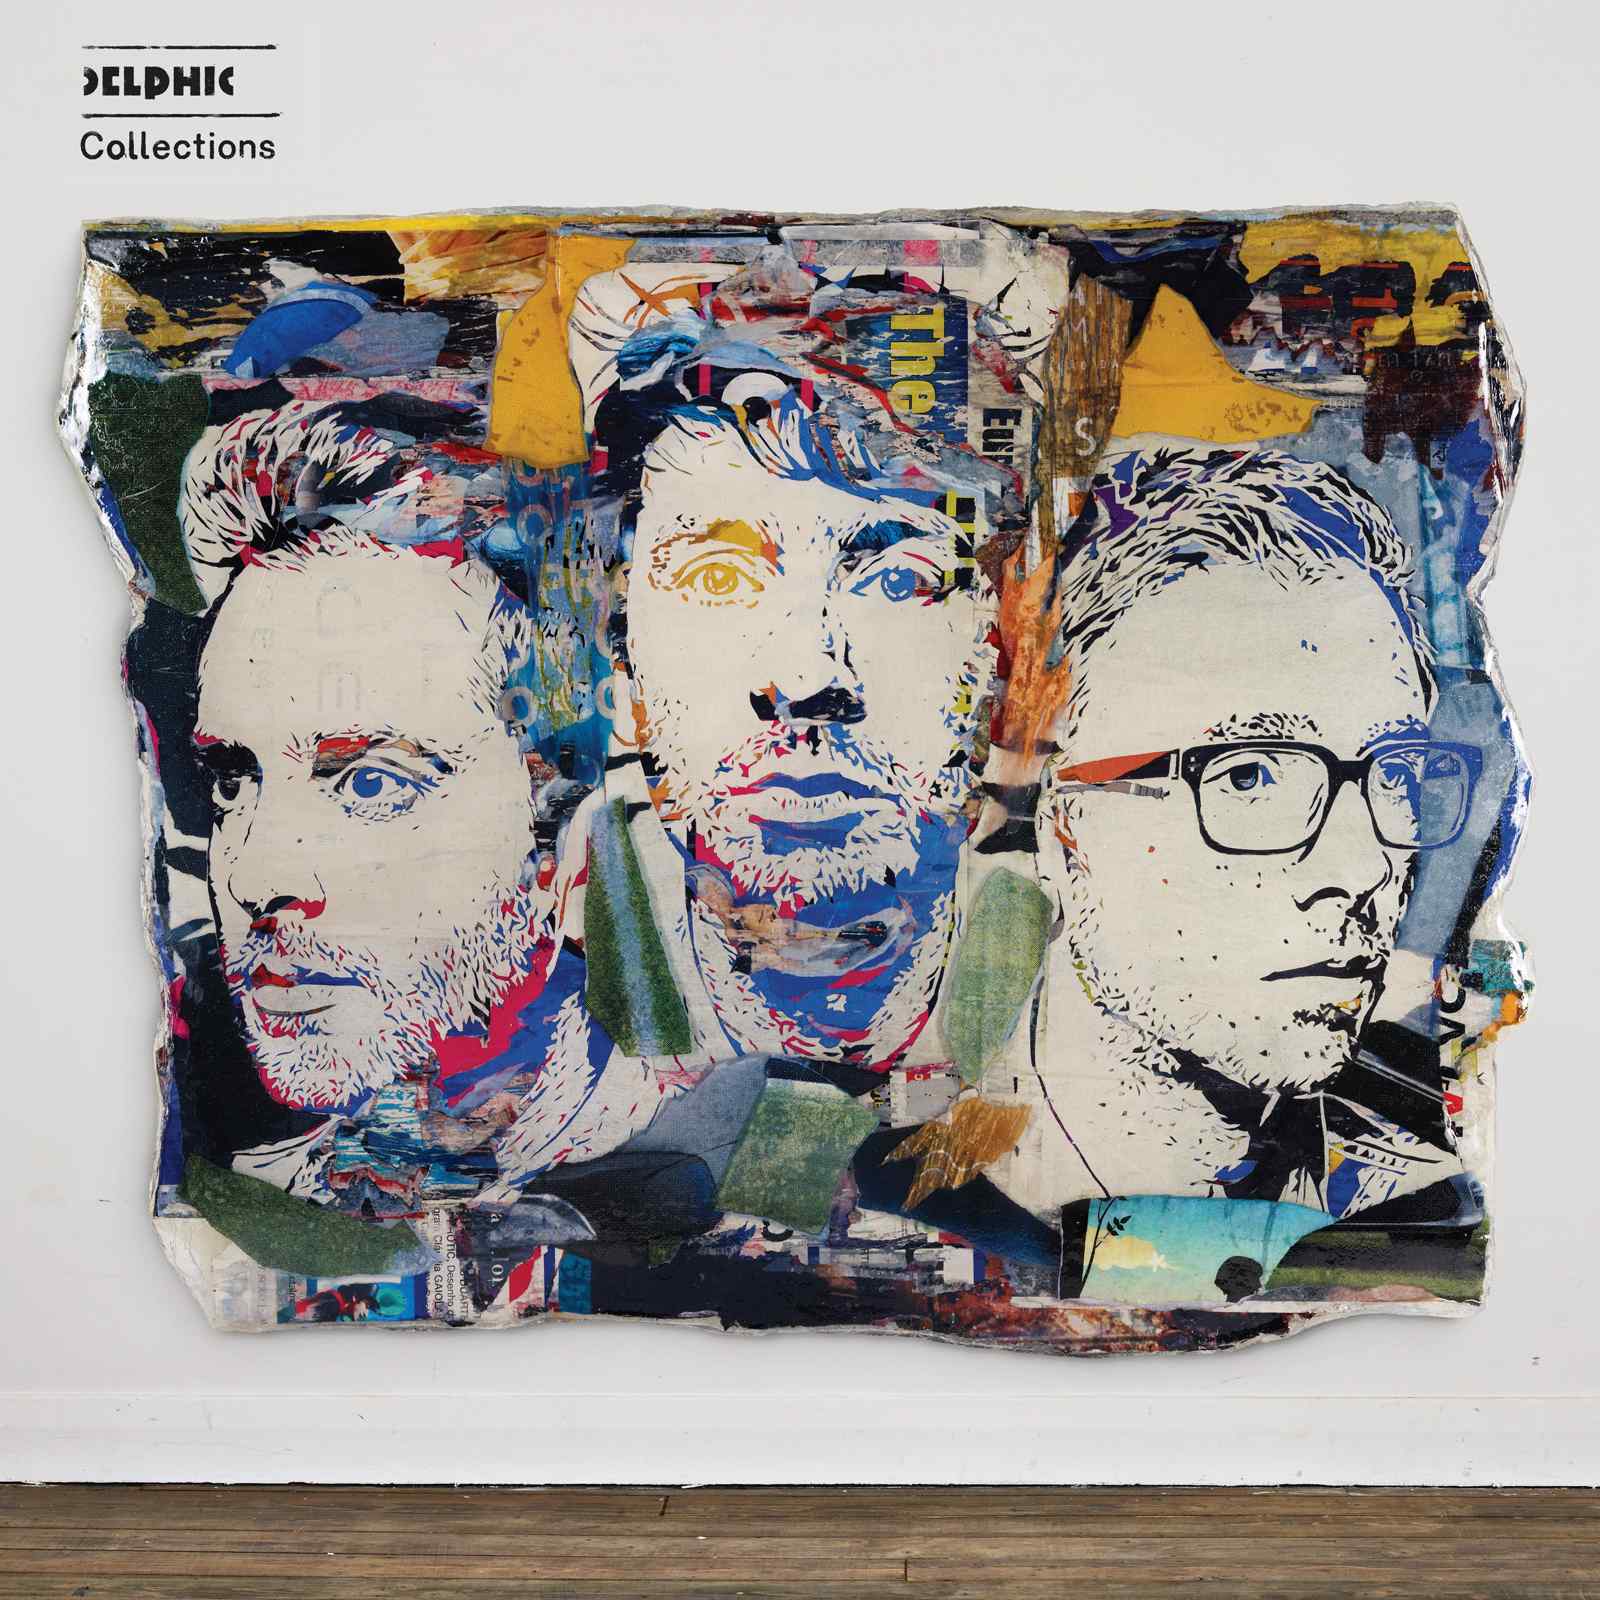 DELPHIC – Collections